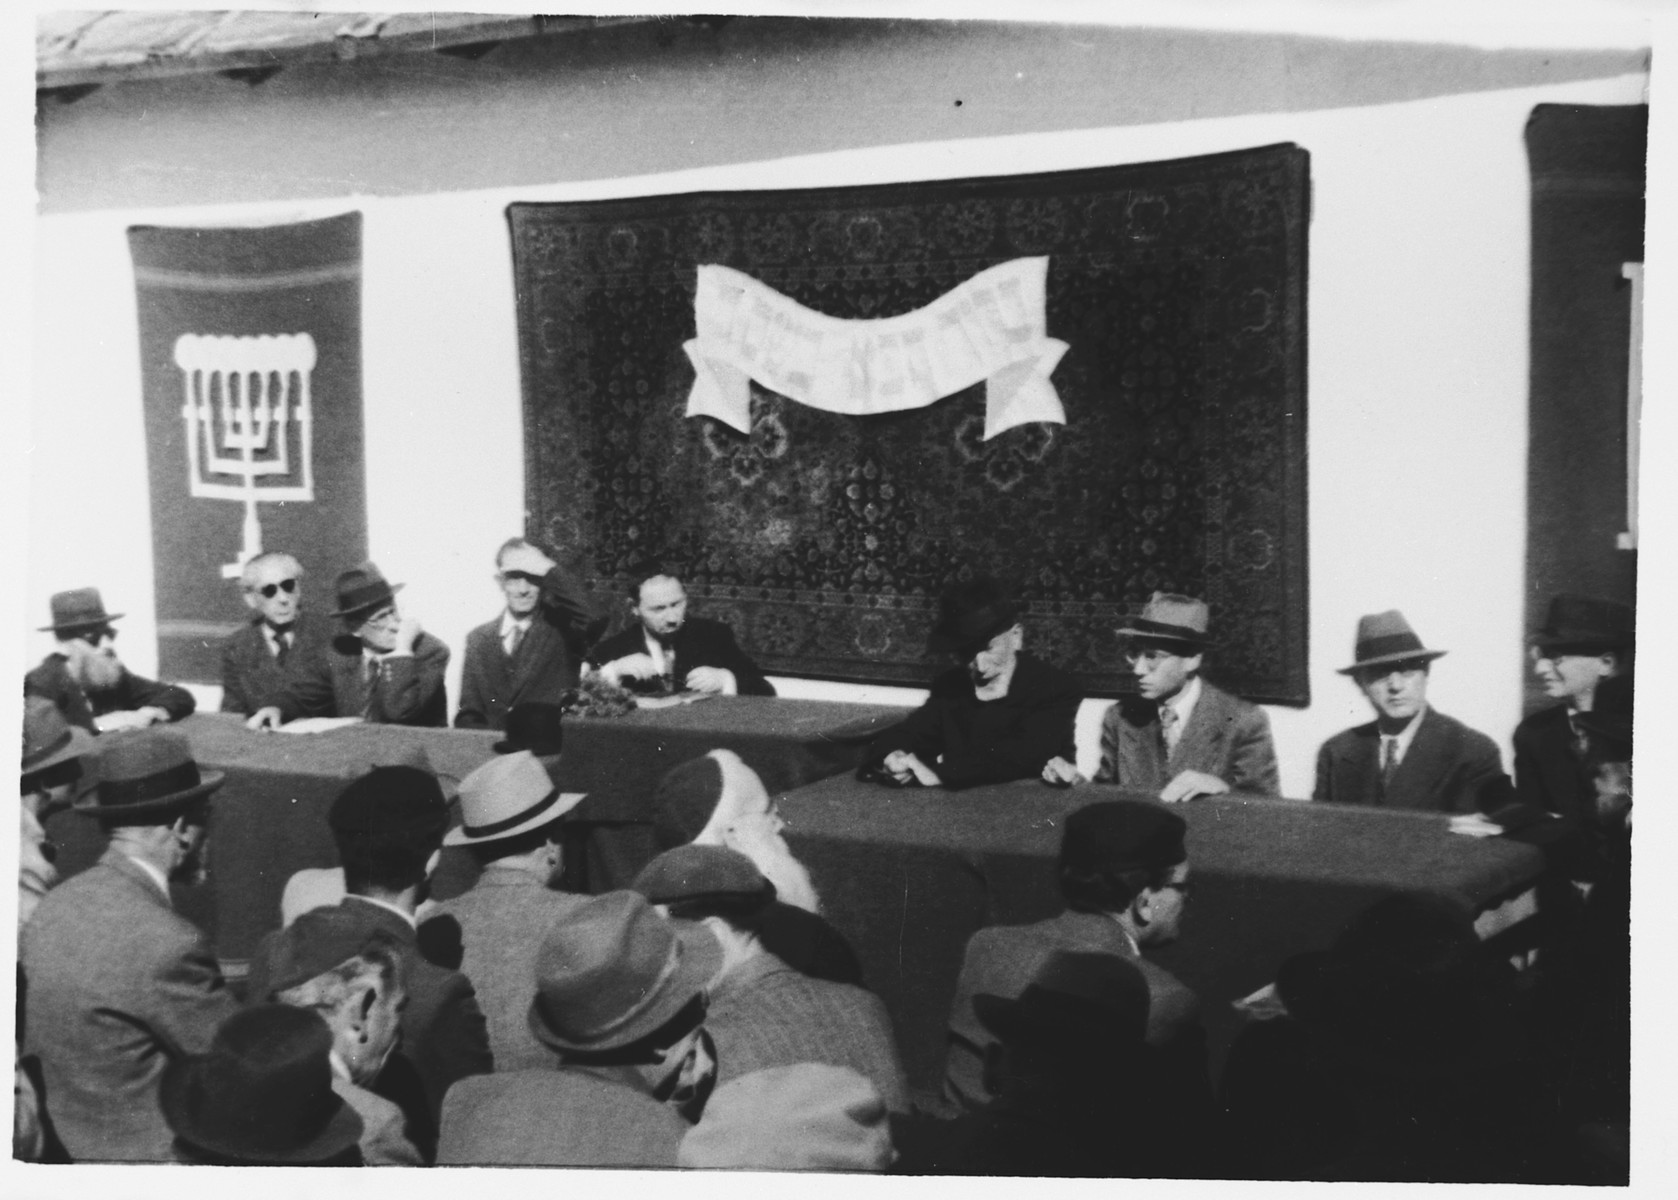 Internees gather for a meeting in the Ferramonti camp to determine work assignments.

This photograph was taken during a visit to the camp by Rabbi Pacifici.

Rabbi Pacifici is seated in the center.  The banner behind him reads "Blessed be your coming in the name of the Lord."